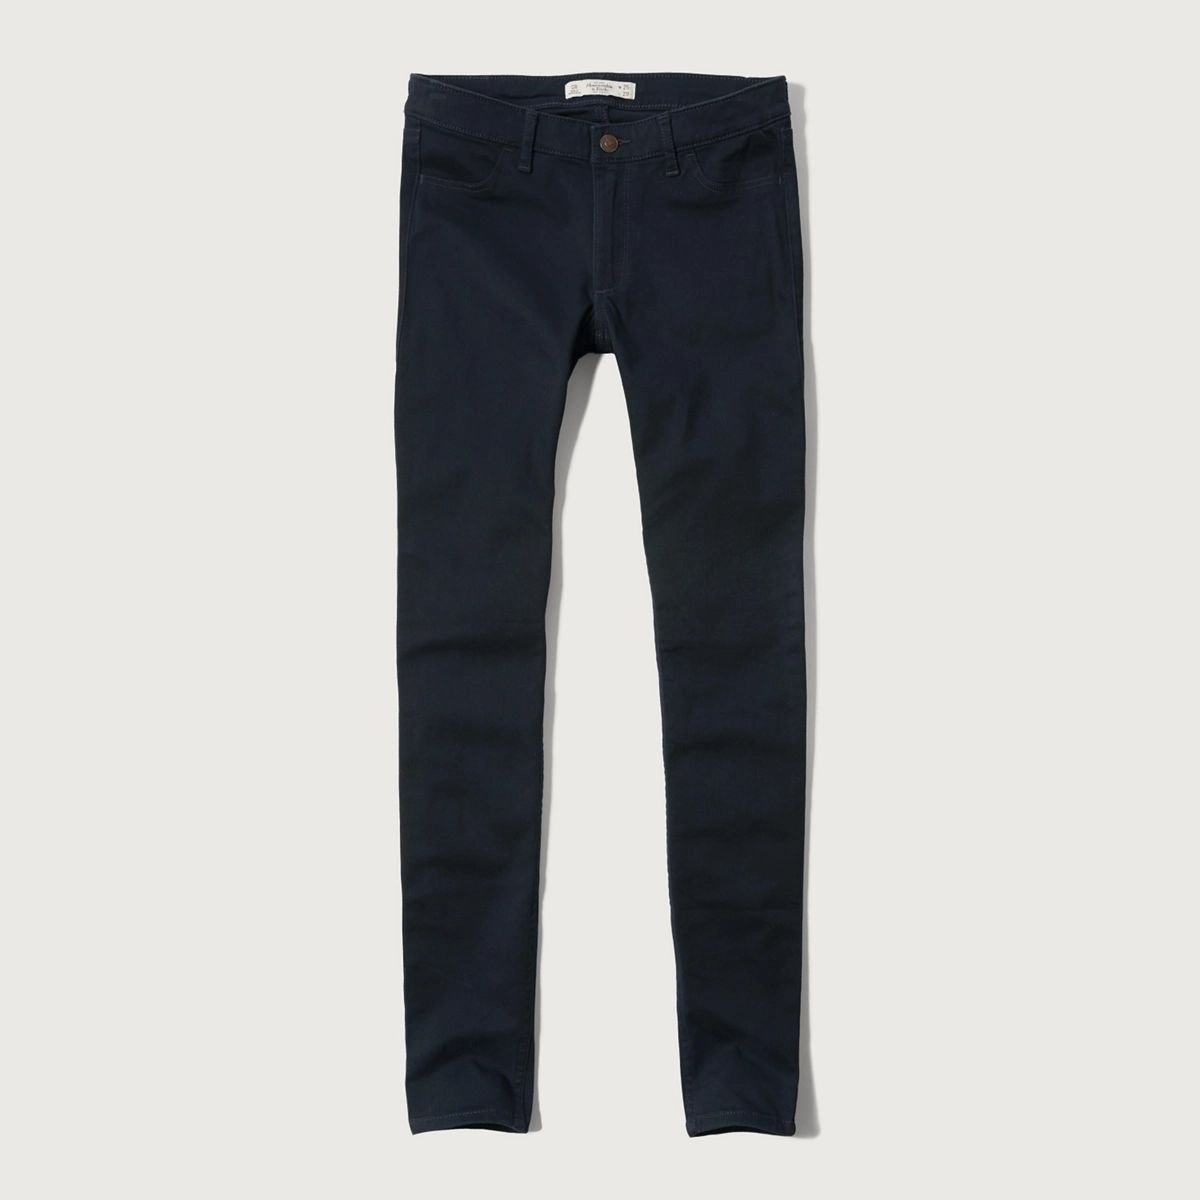 Jeggings | Abercrombie & Fitch US & UK